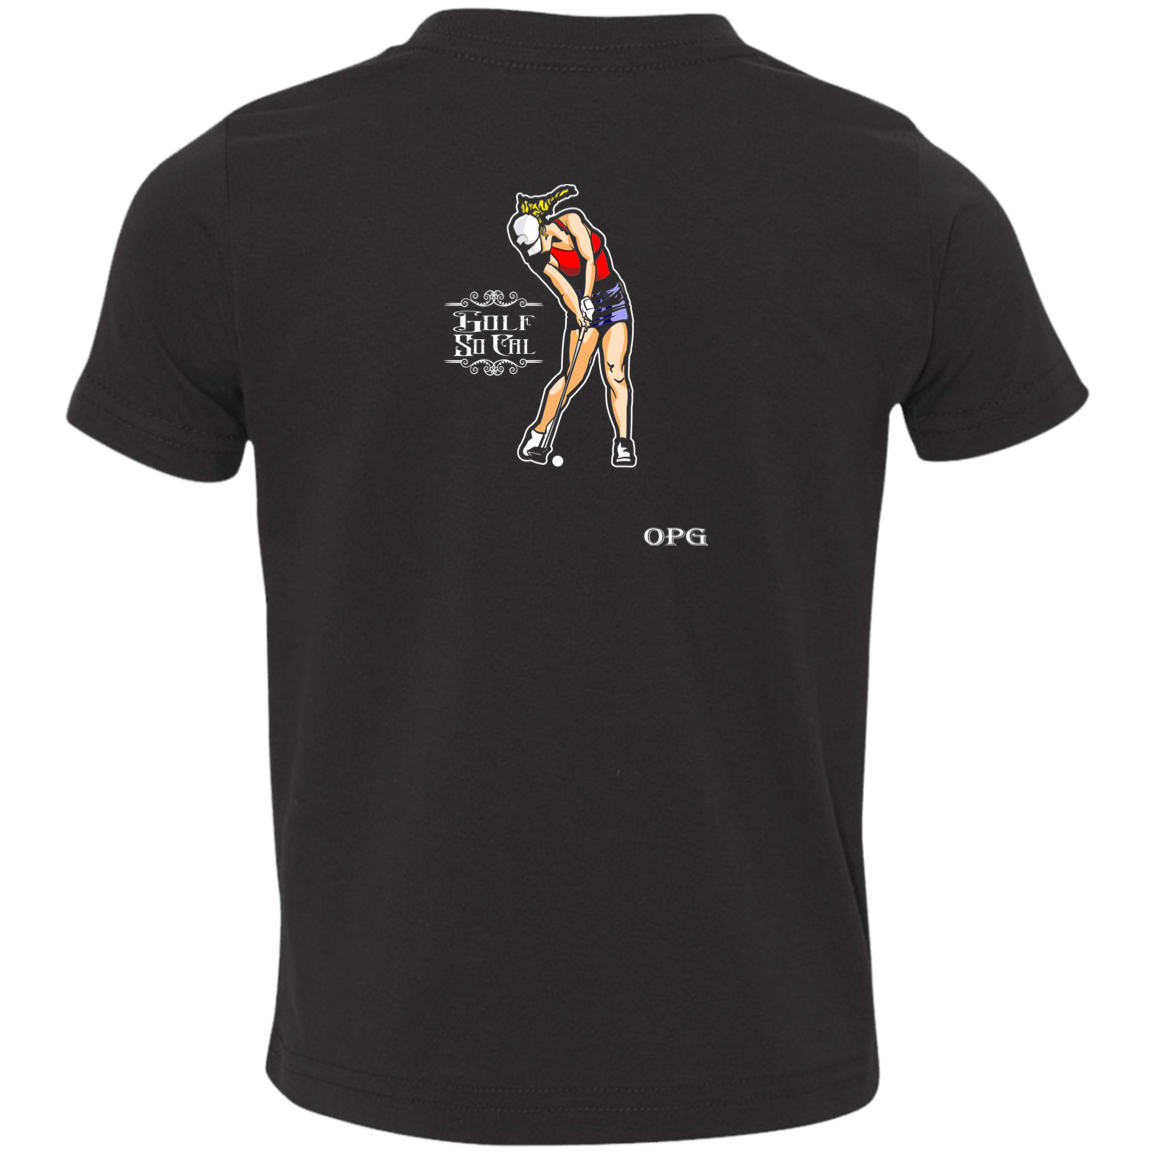 OPG Custom Design #9. Drive it. Chip it. One Putt Golf It. Golf So. Cal. Toddlers' Cotton T-Shirt